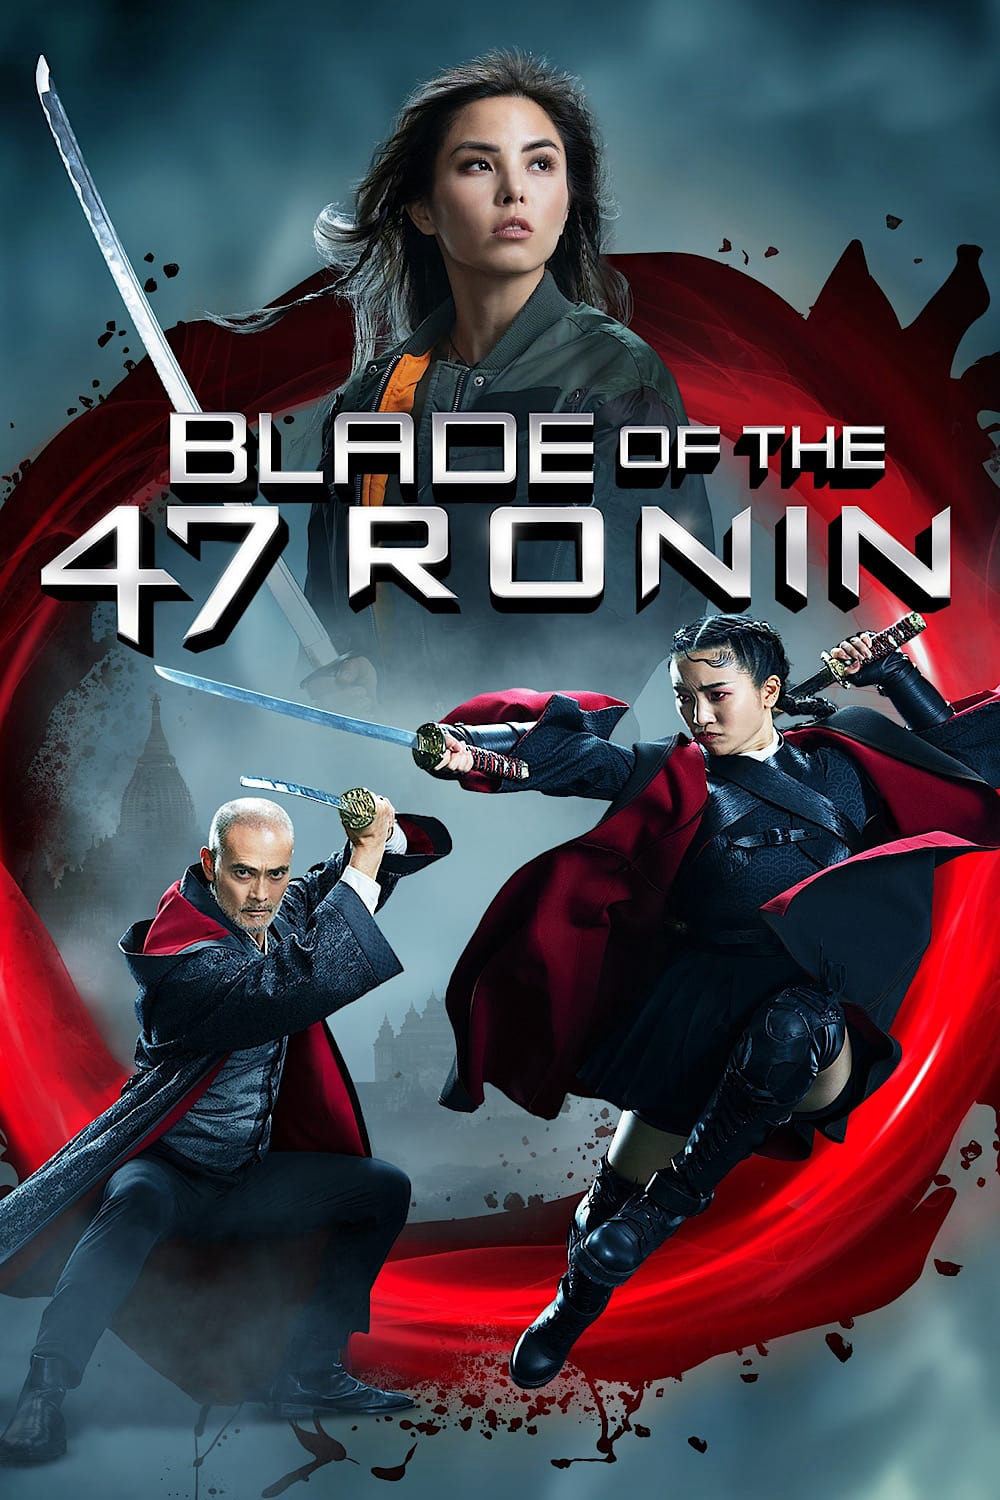 Poster Phim Blade of the 47 Ronin (Blade of the 47 Ronin)